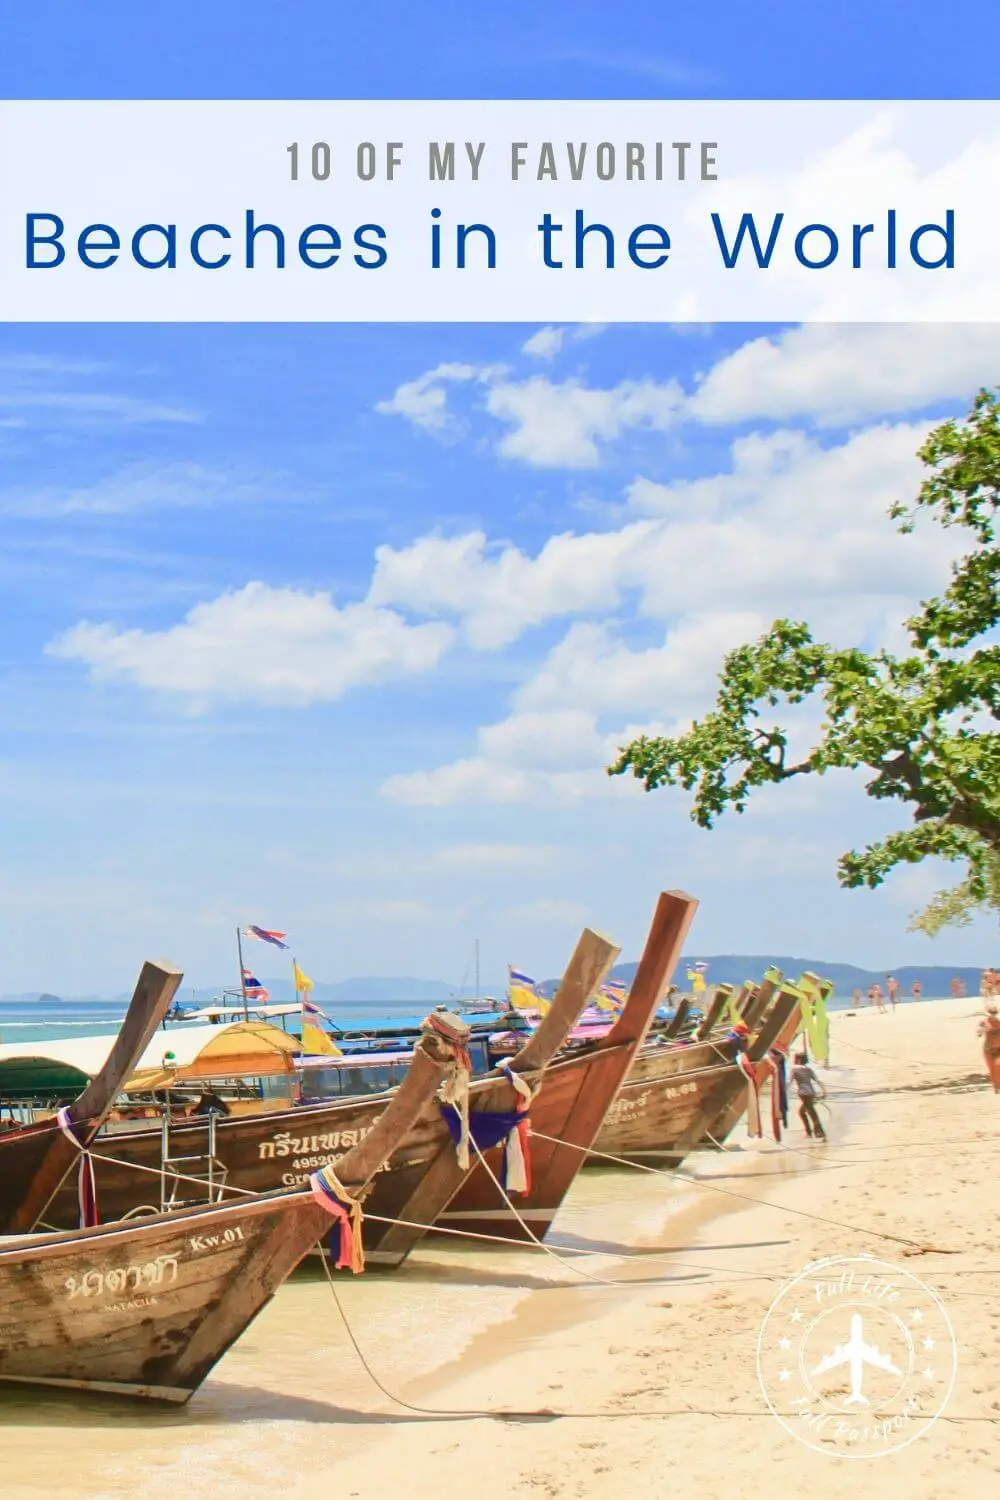 10 of My Favorite Beaches in the World